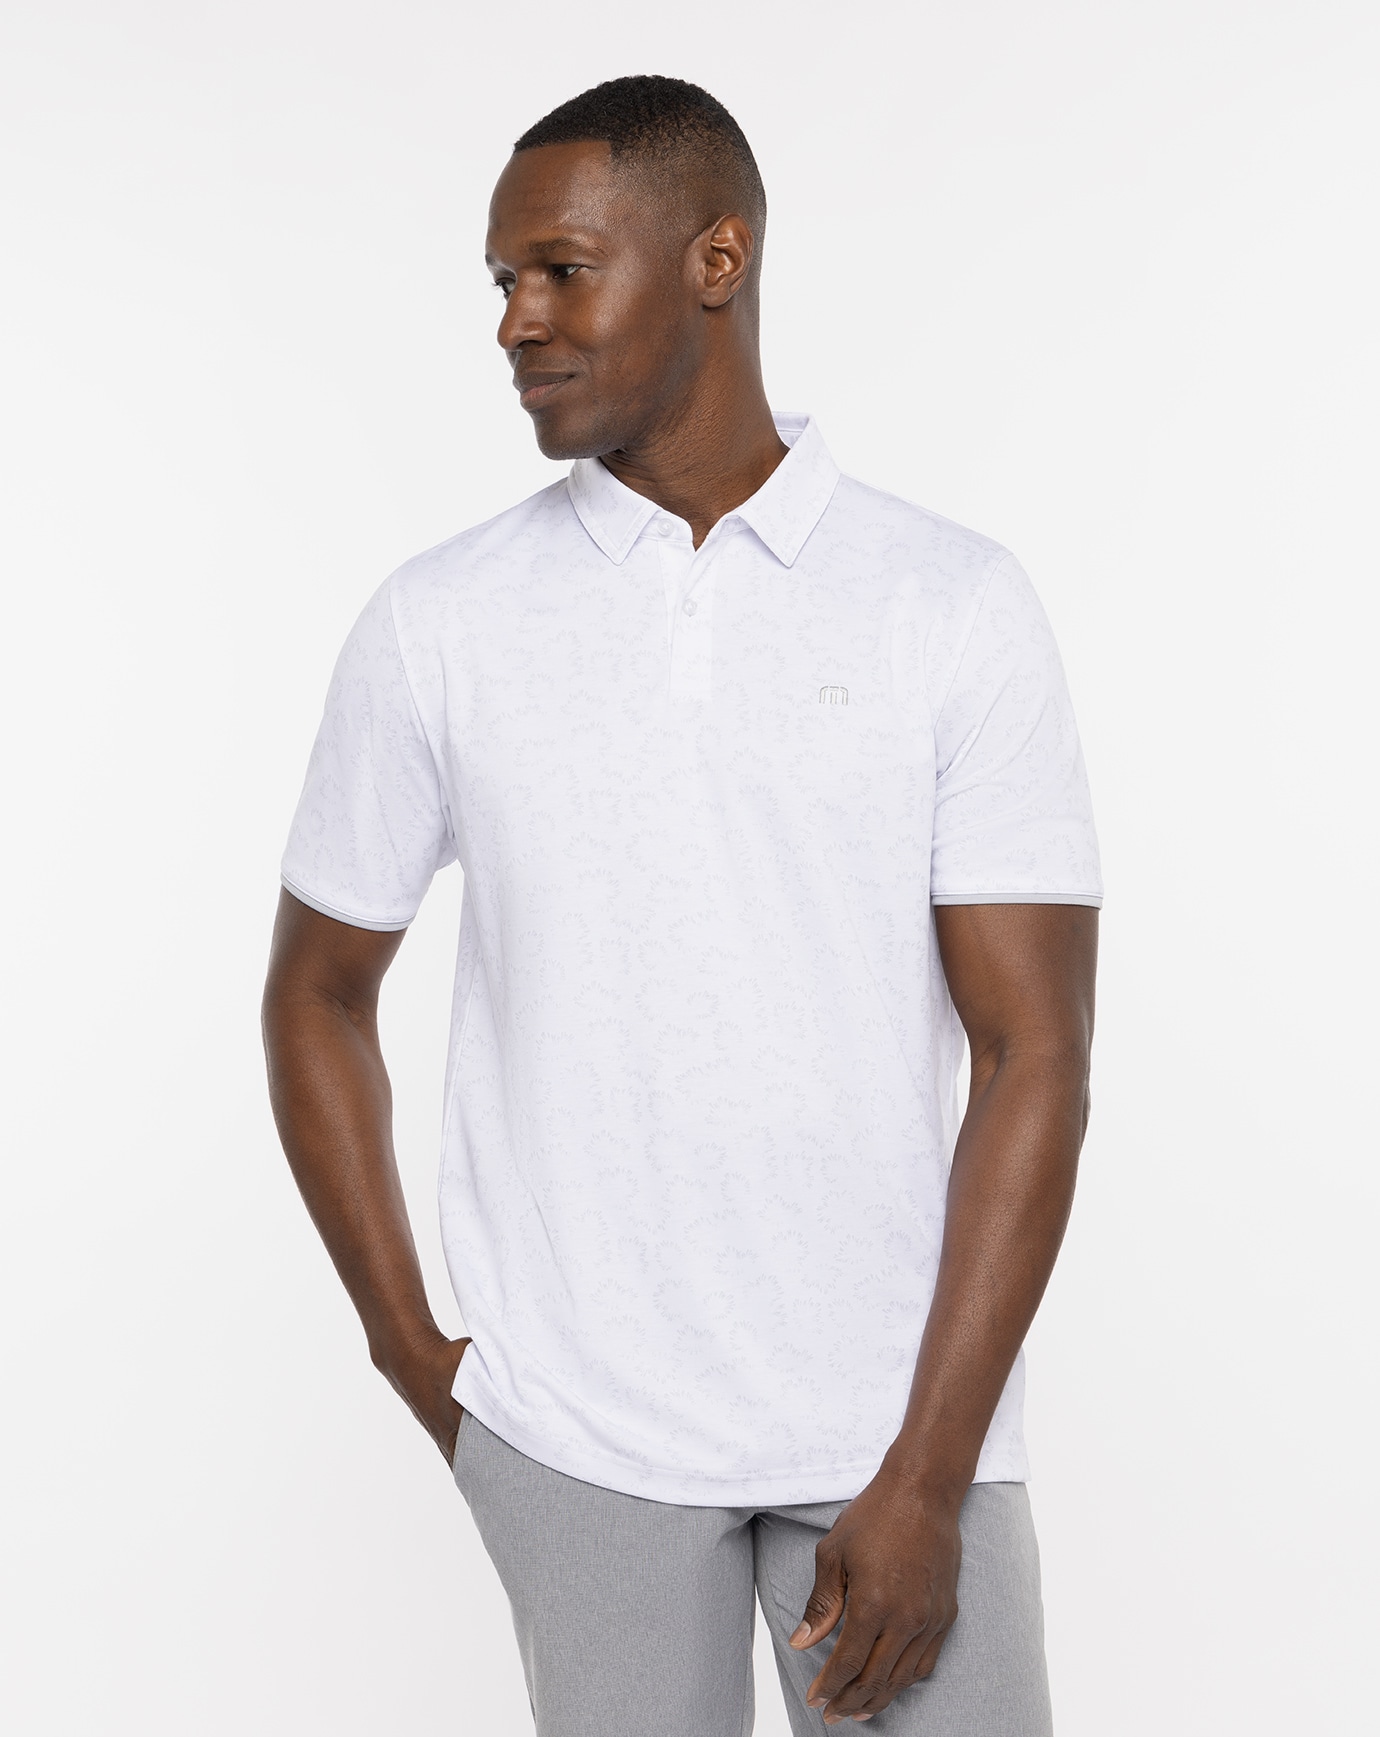 Related Product - ALWAYS CHILL POLO